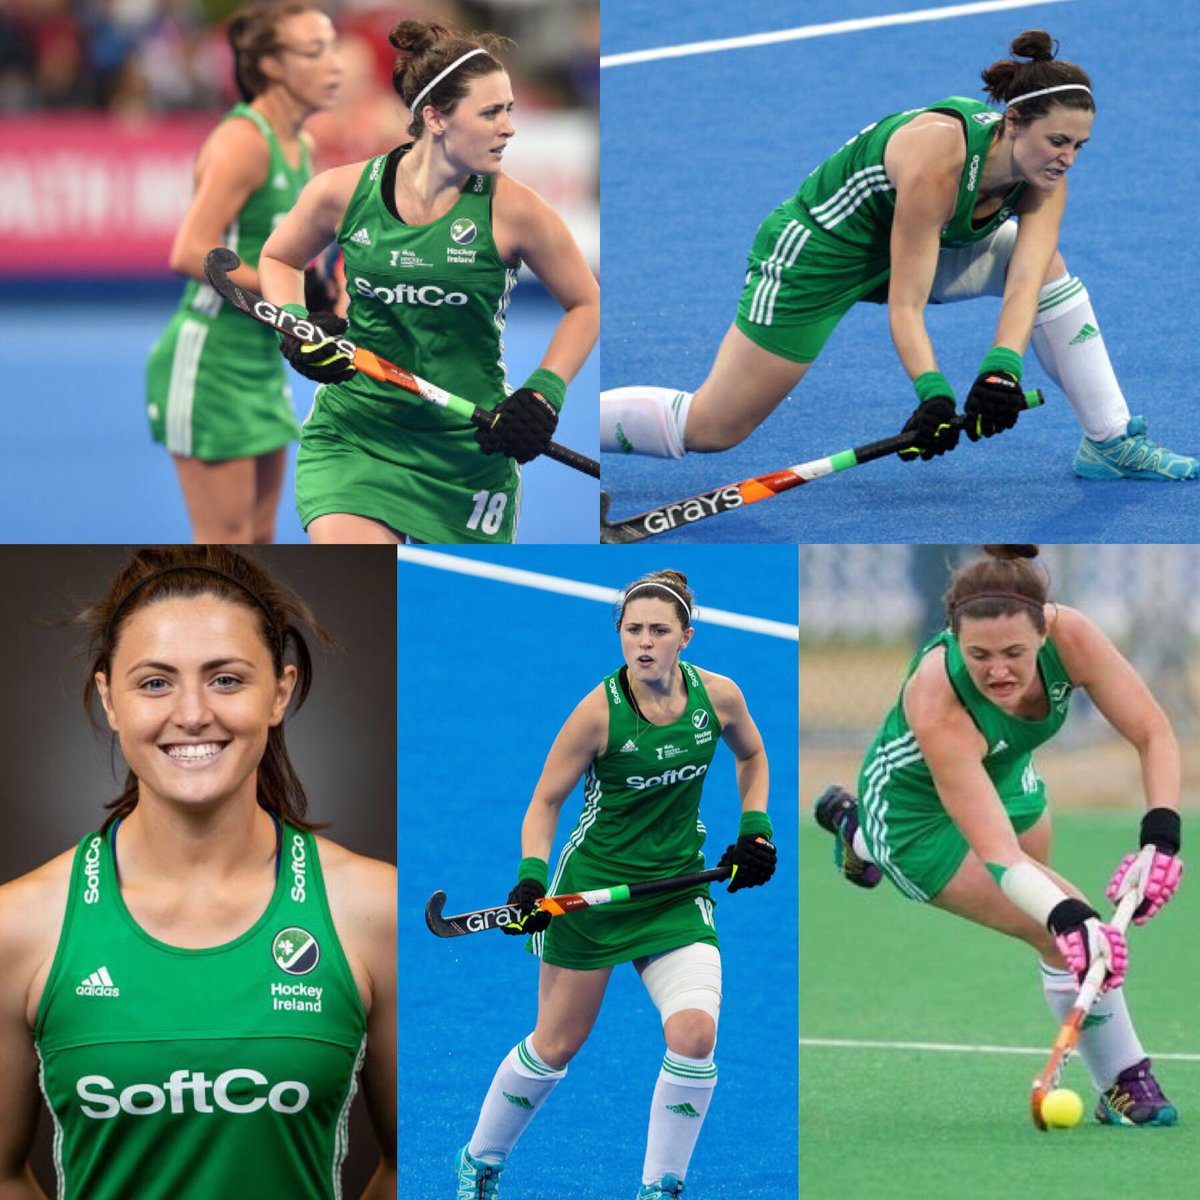 While she is focusing on the #roadtotokyo we’ve taken control of the social media! Huge congrats to the amazing Roisín Upton who has stormed to 50 caps! We’re so proud of her and the work she puts in on and off the pitch! #teamsohockey #rómodel 🧢🏑☘️